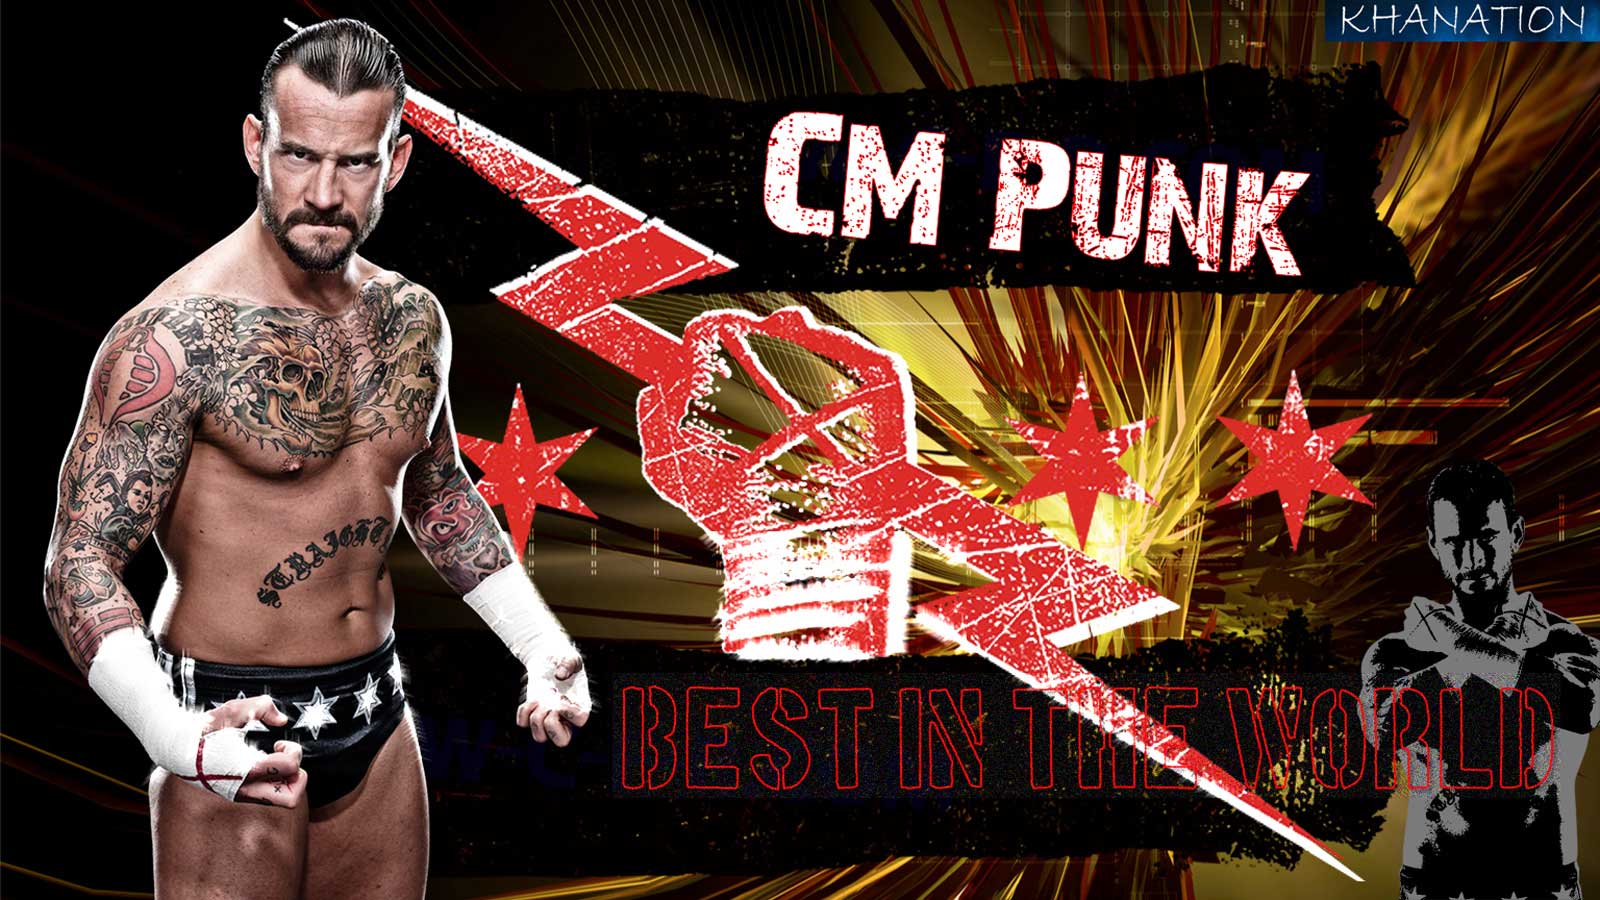 ... Wallpapers | WWE WrestleMania: CM Punk BEST IN THE WORLD Wallpapers